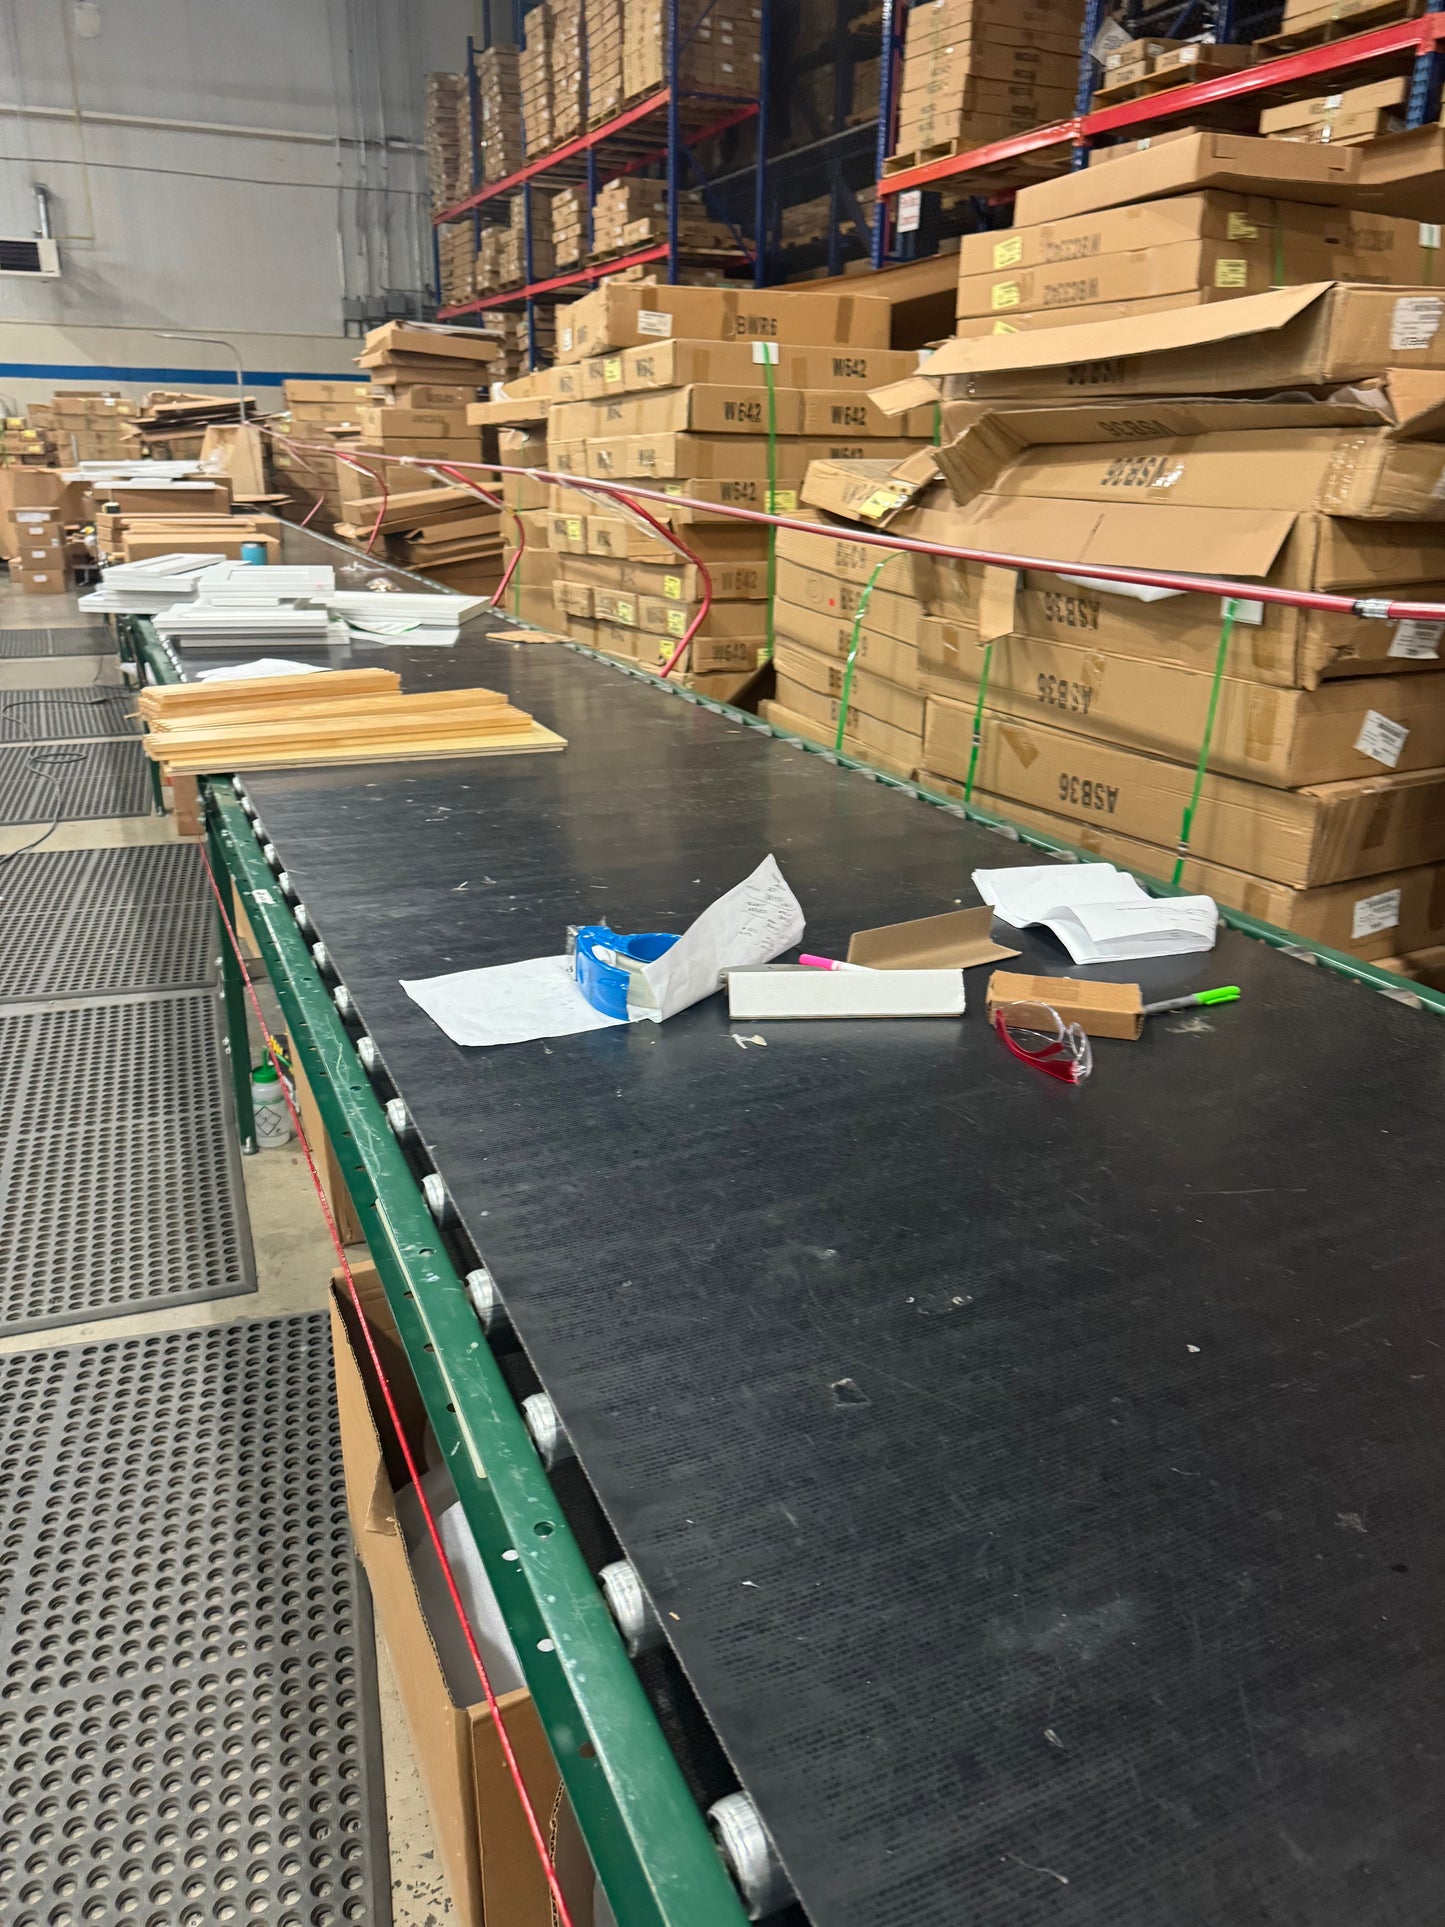 2020 CPC Pack C100 - Hot Glue Cardboard Packing/Closing System with Conveyors - South Carolina